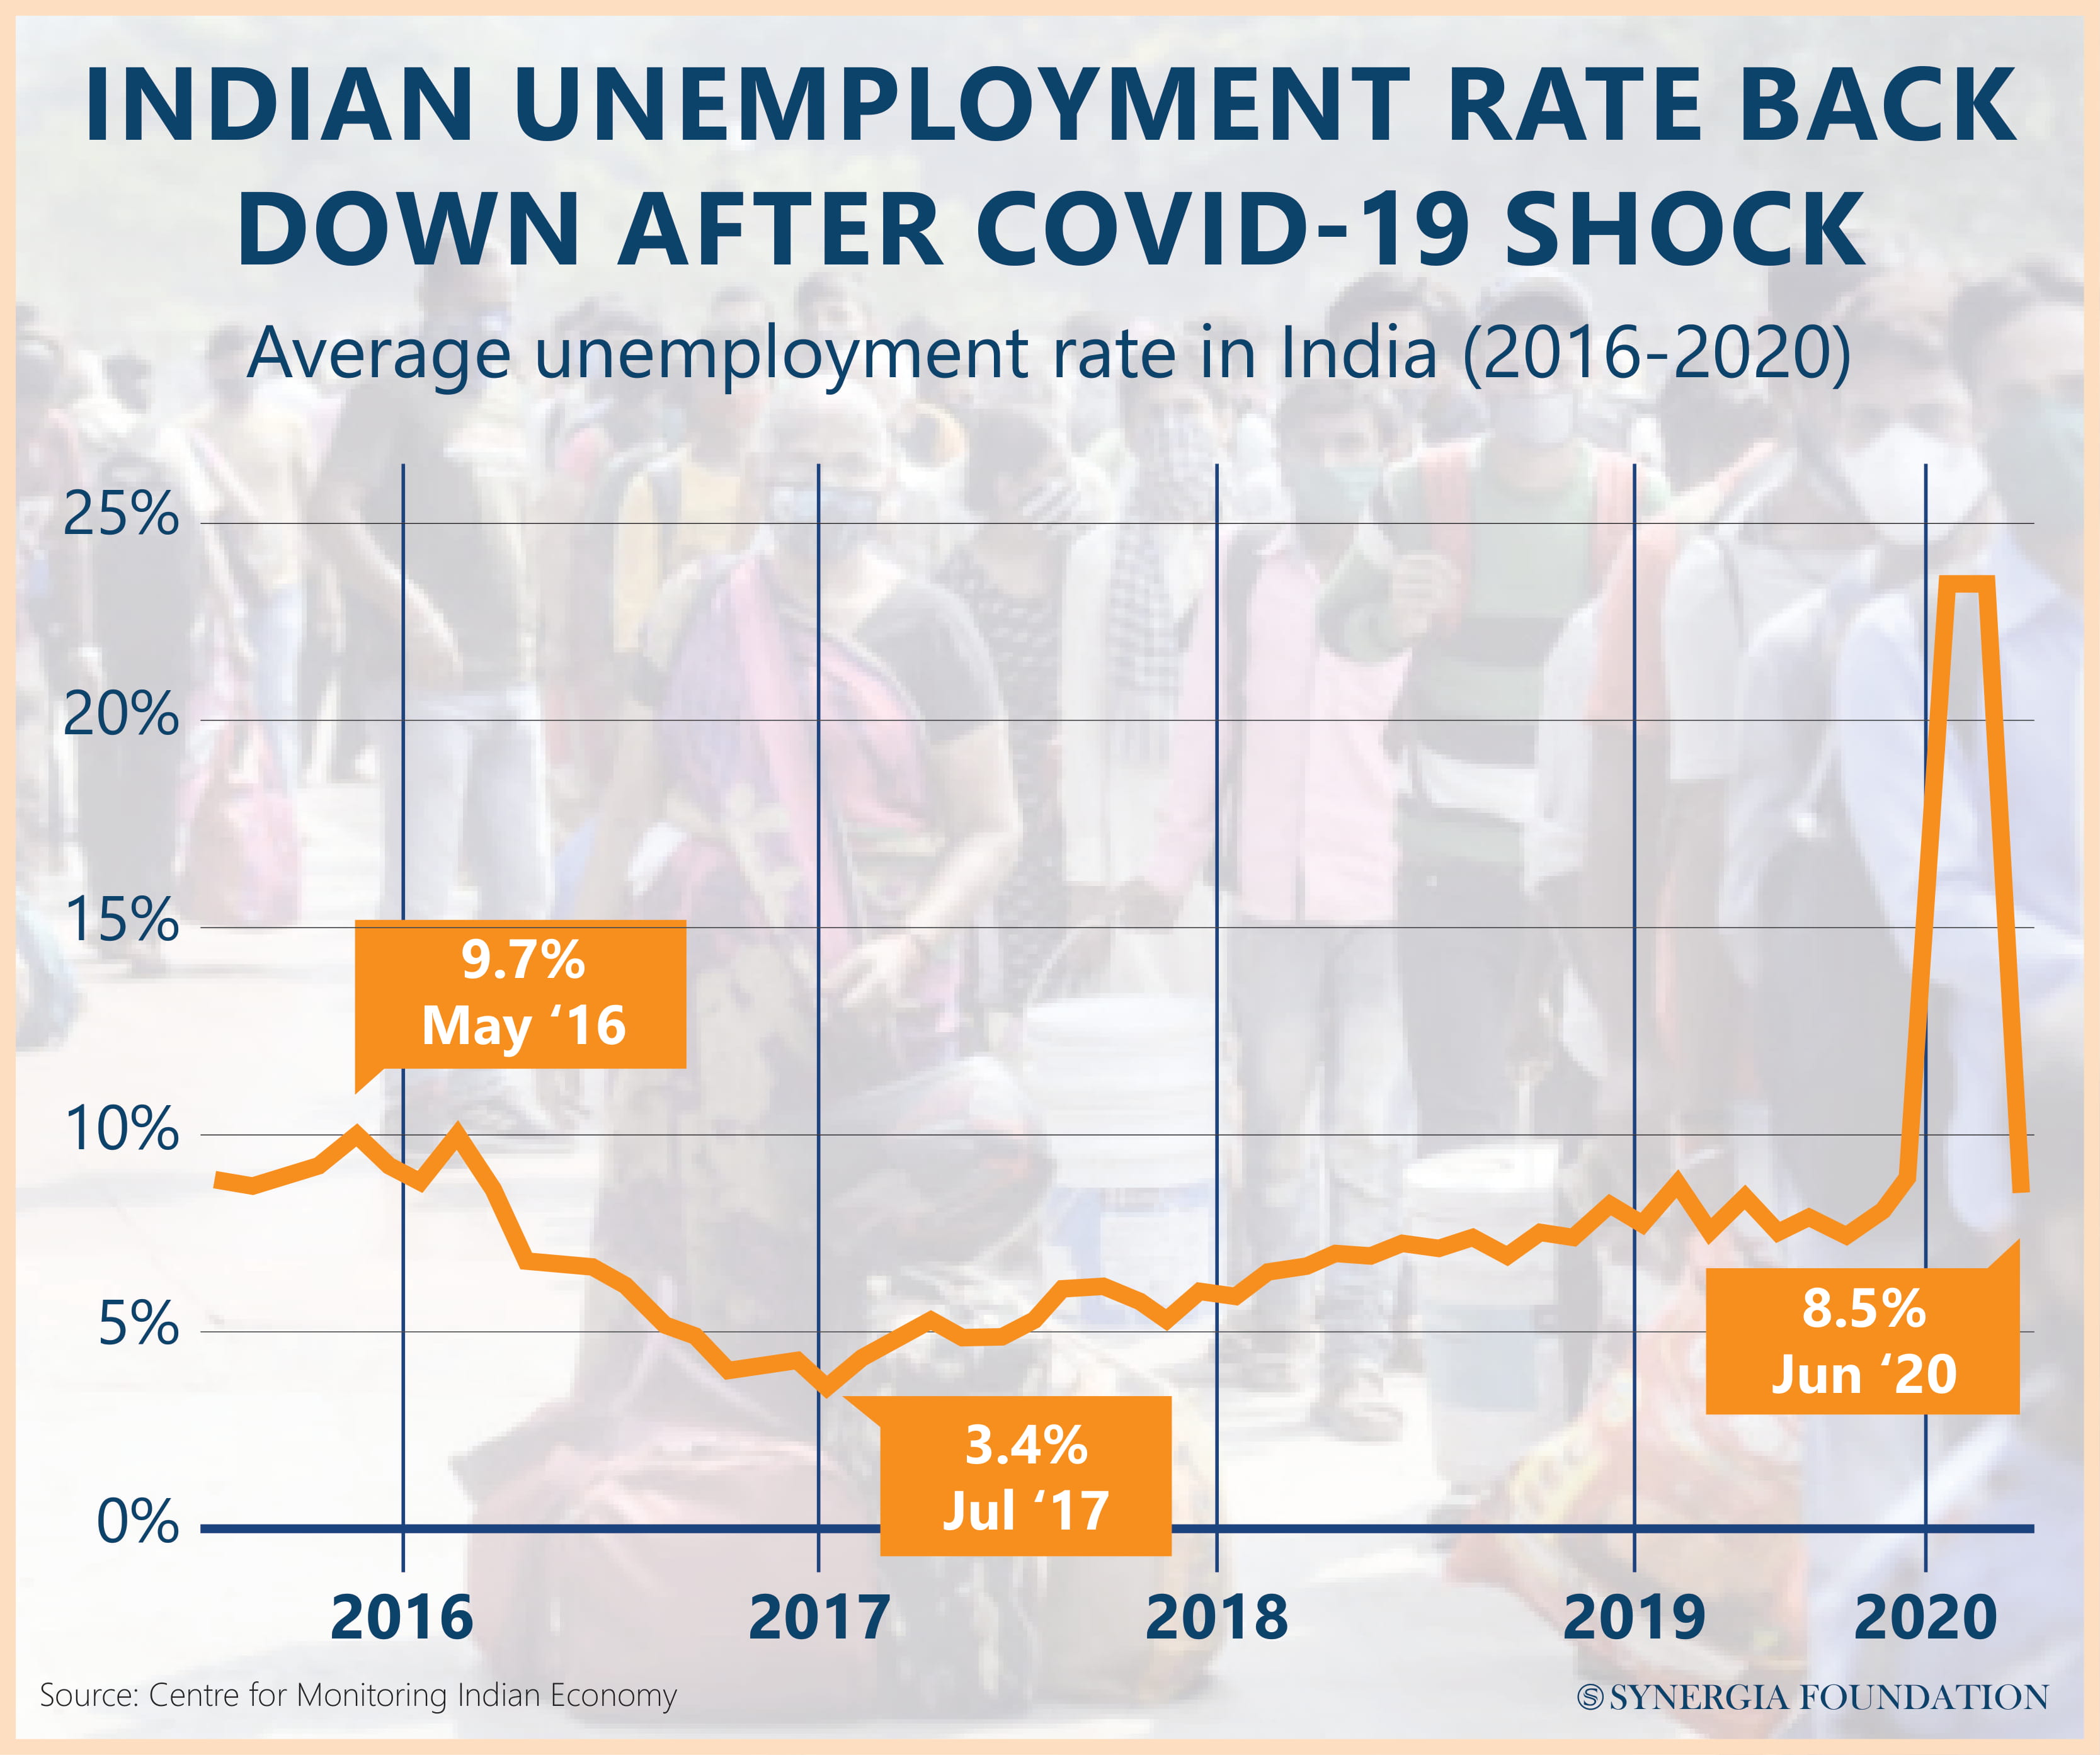 Indian unemployment after COVID-19 shock